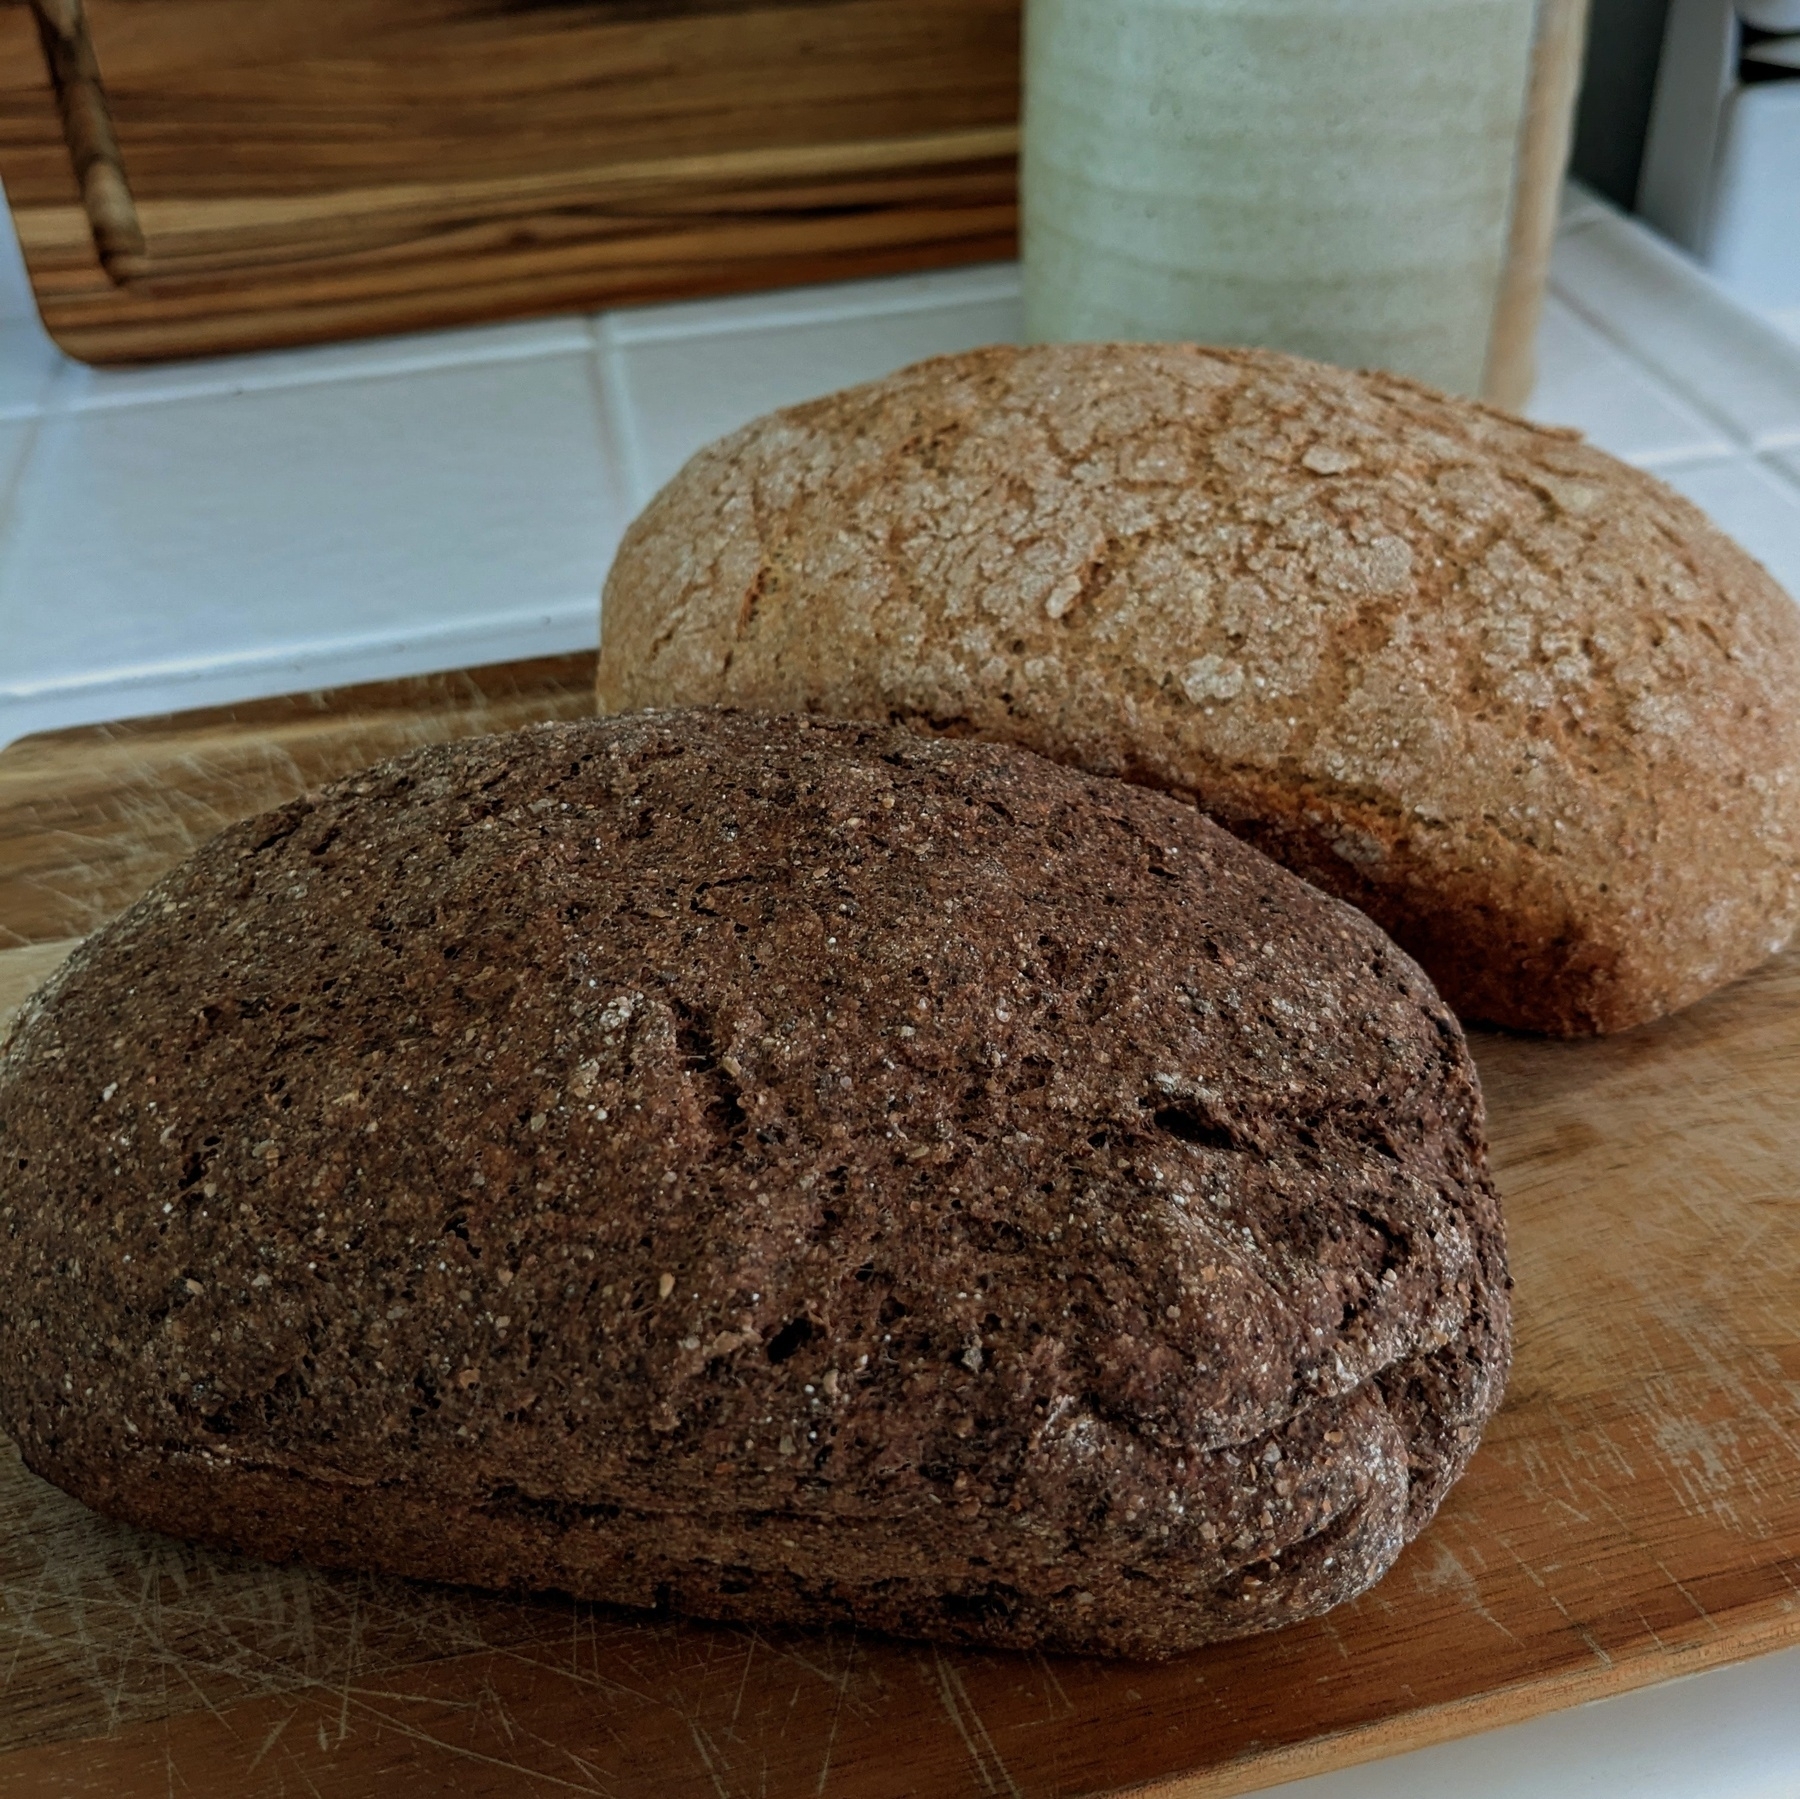 Two homemade loaves of bread sit on a wooden cutting board on a white tile kitchen counter. They are angled diagonally across the frame. The loaf in the front is a darker brown while the second loaf is much lighter in color. 